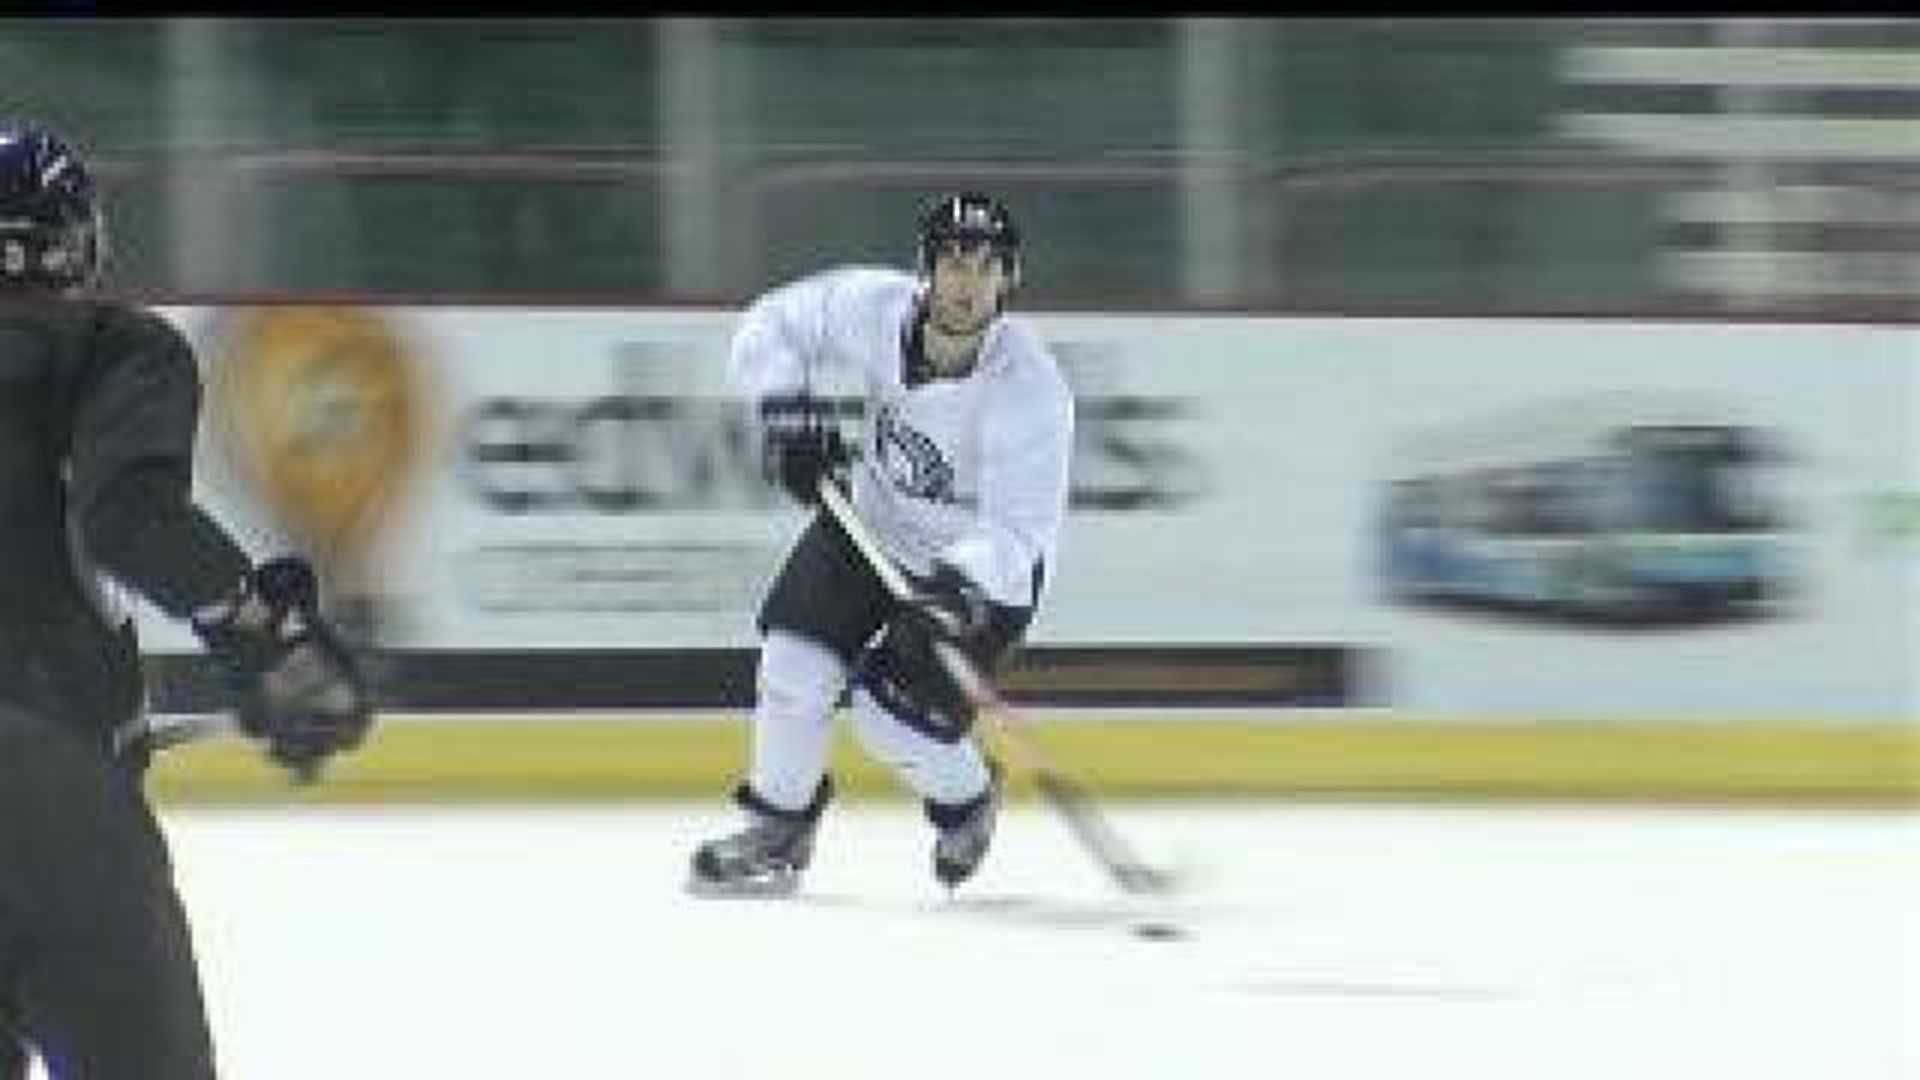 Third year Mallards player is Rookie of the Year